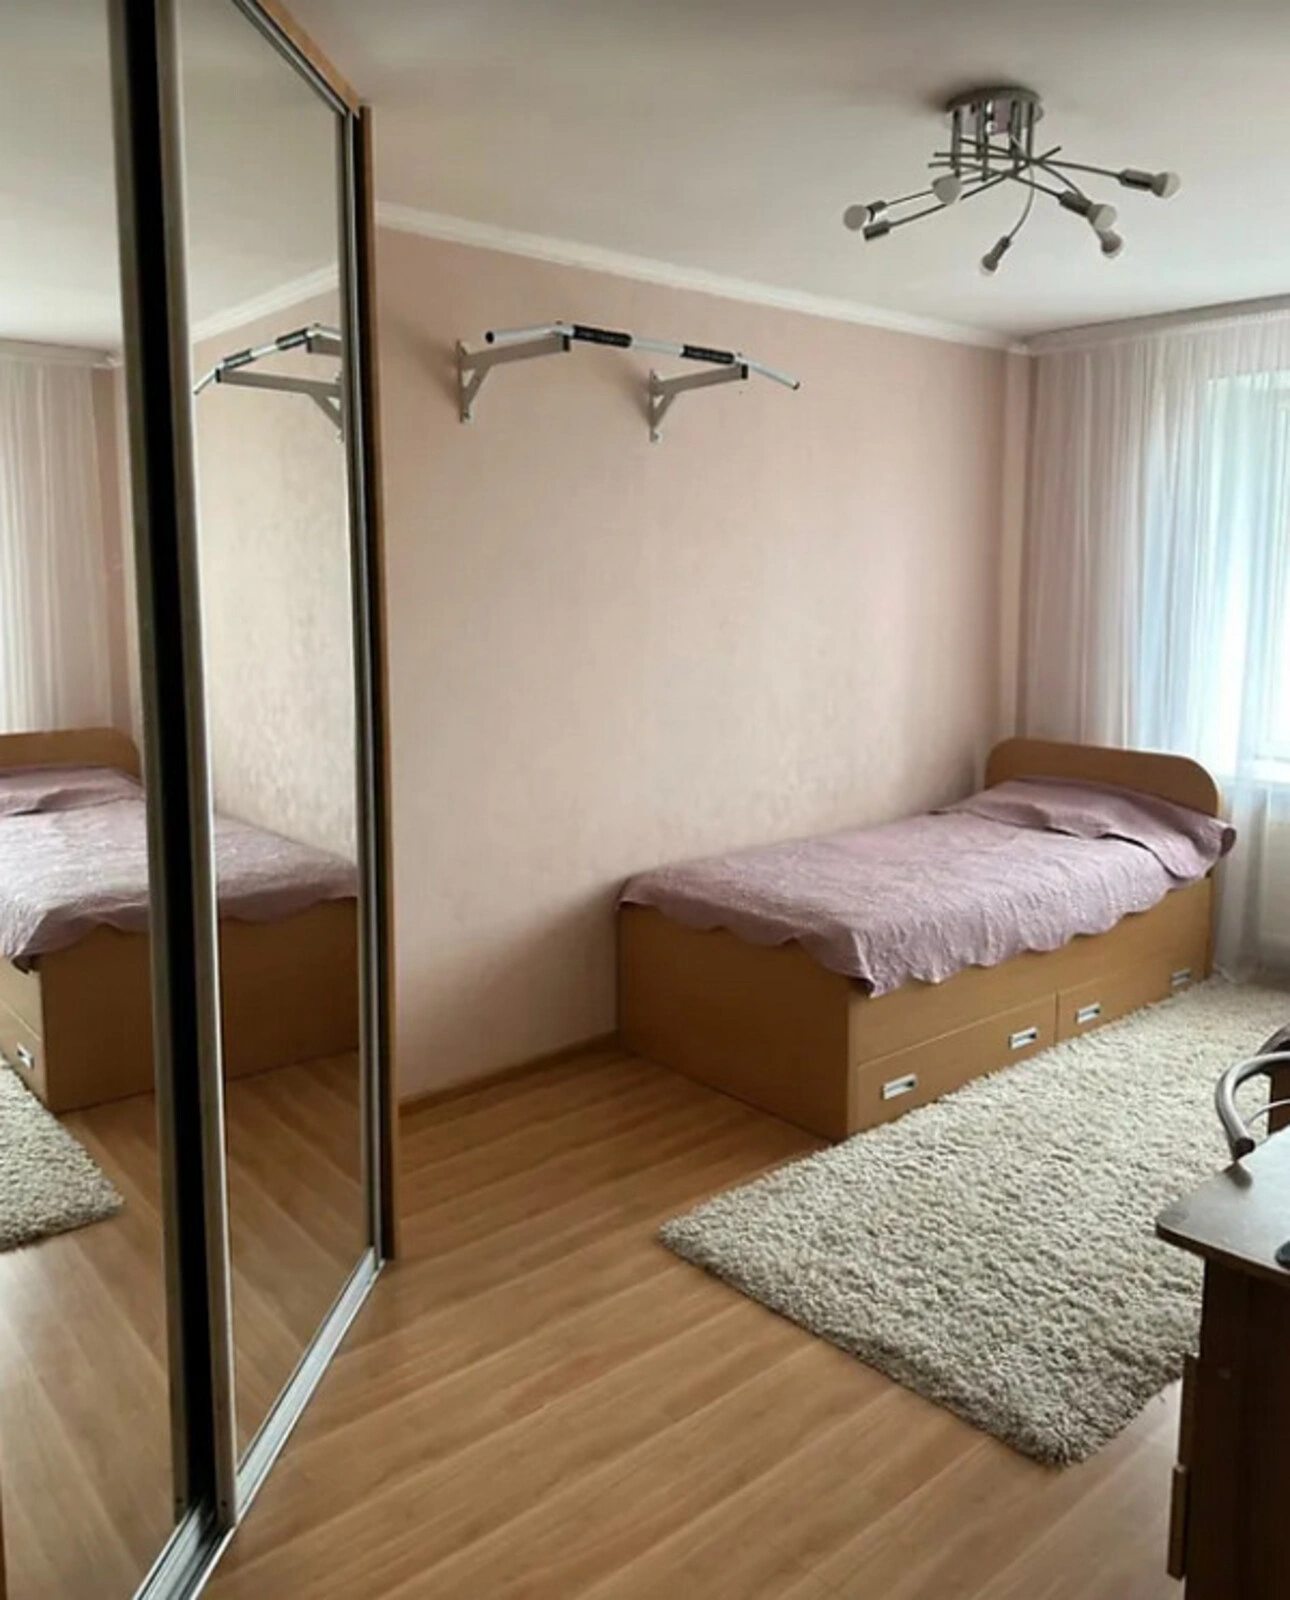 Apartments for sale. 3 rooms, 120 m², 10th floor/10 floors. Bam, Ternopil. 